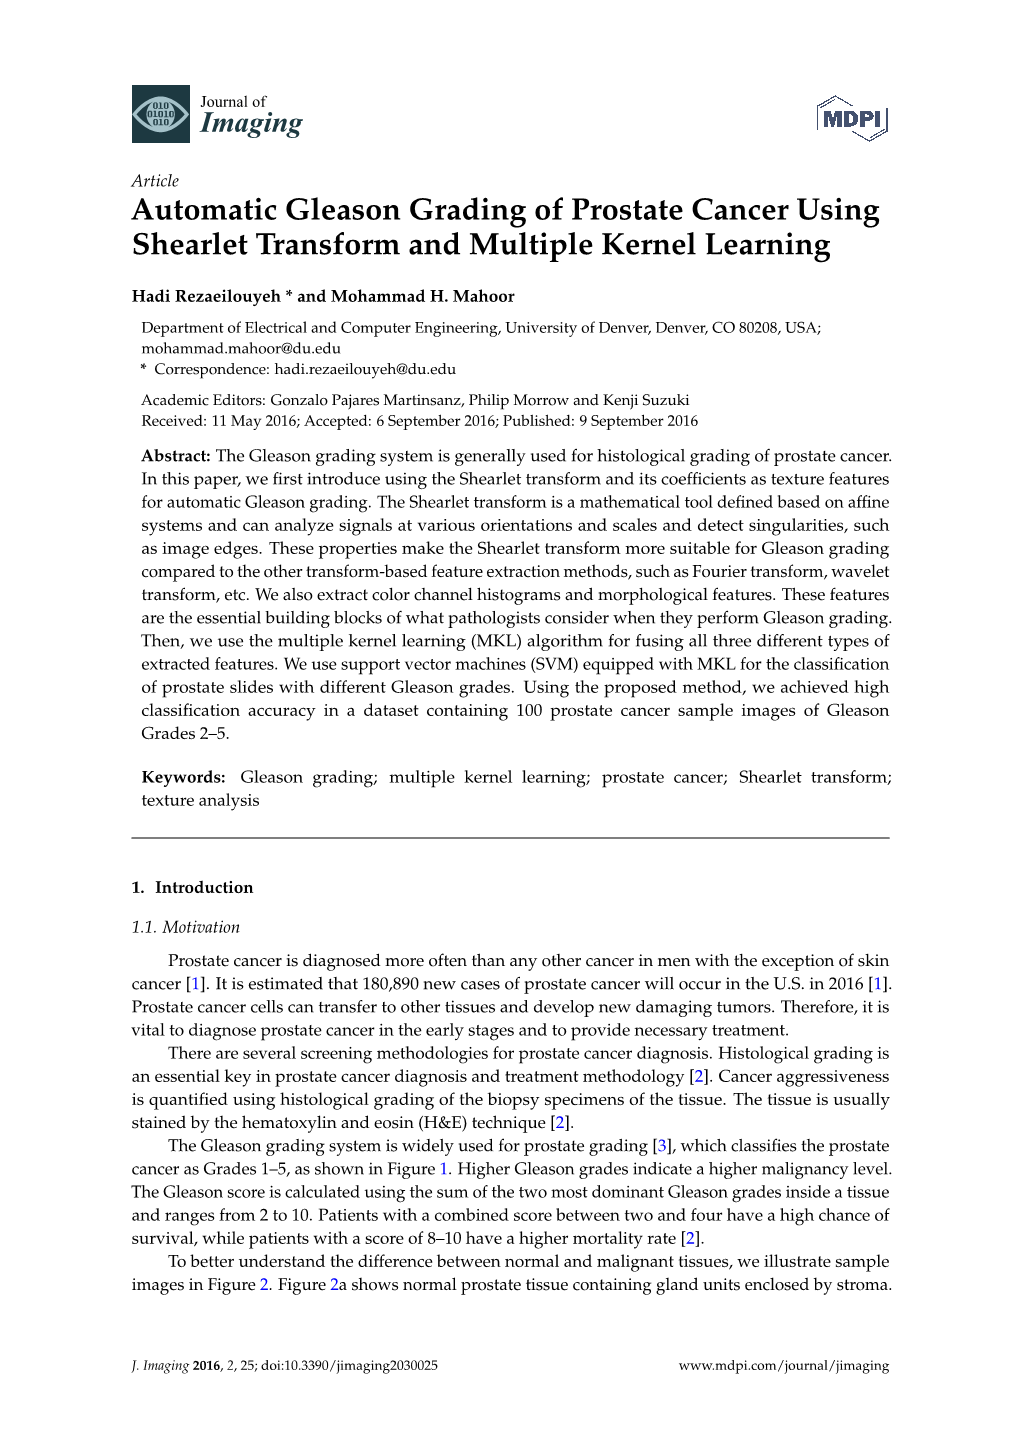 Automatic Gleason Grading of Prostate Cancer Using Shearlet Transform and Multiple Kernel Learning